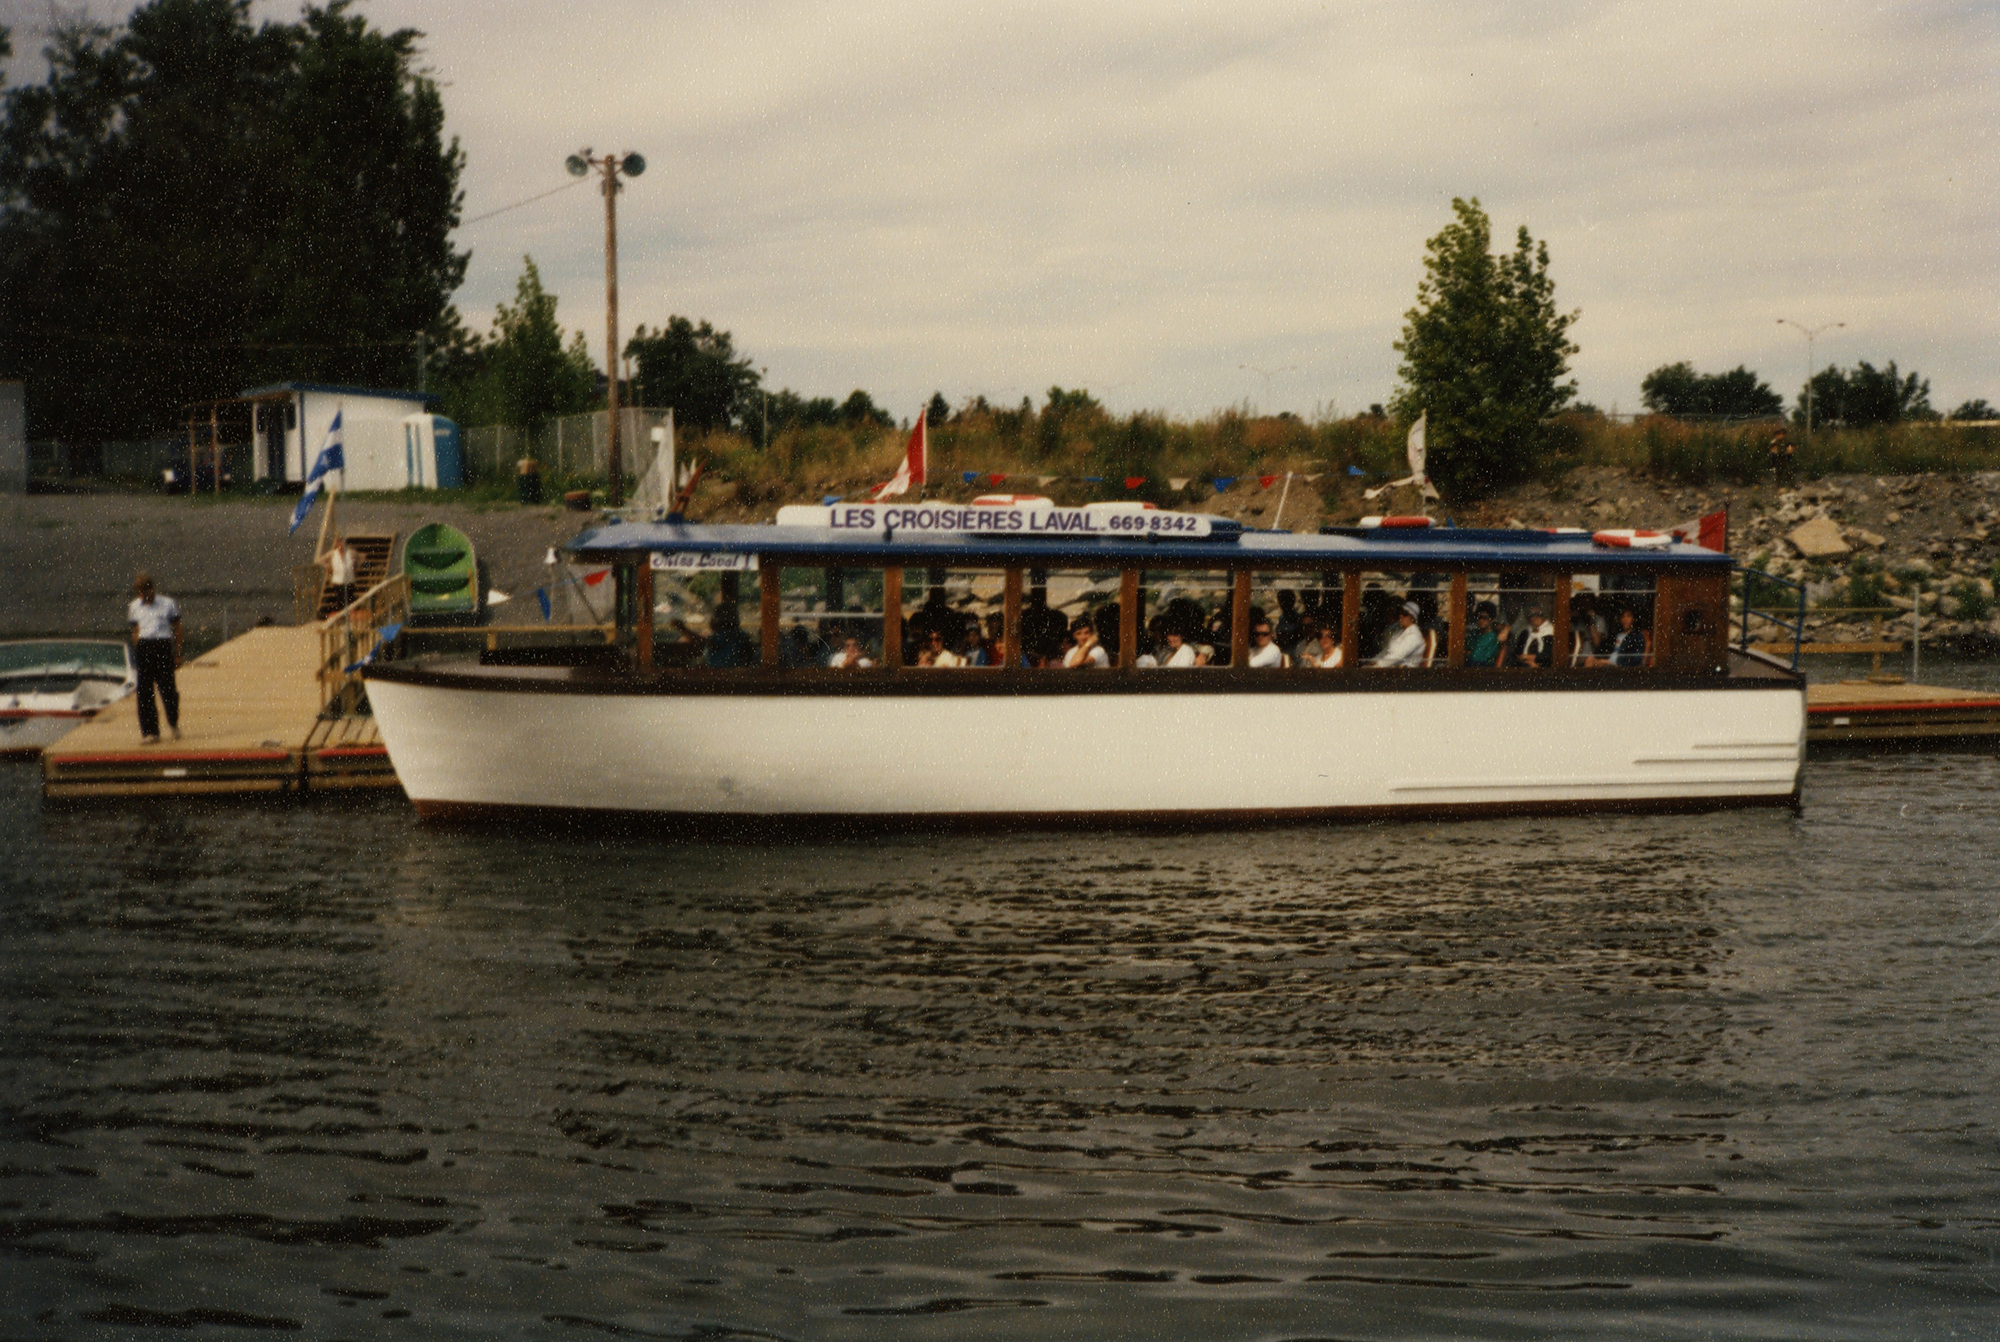 Colour photograph of a white boat moored and filled with passengers ready for a cruise on the Des Prairies River.